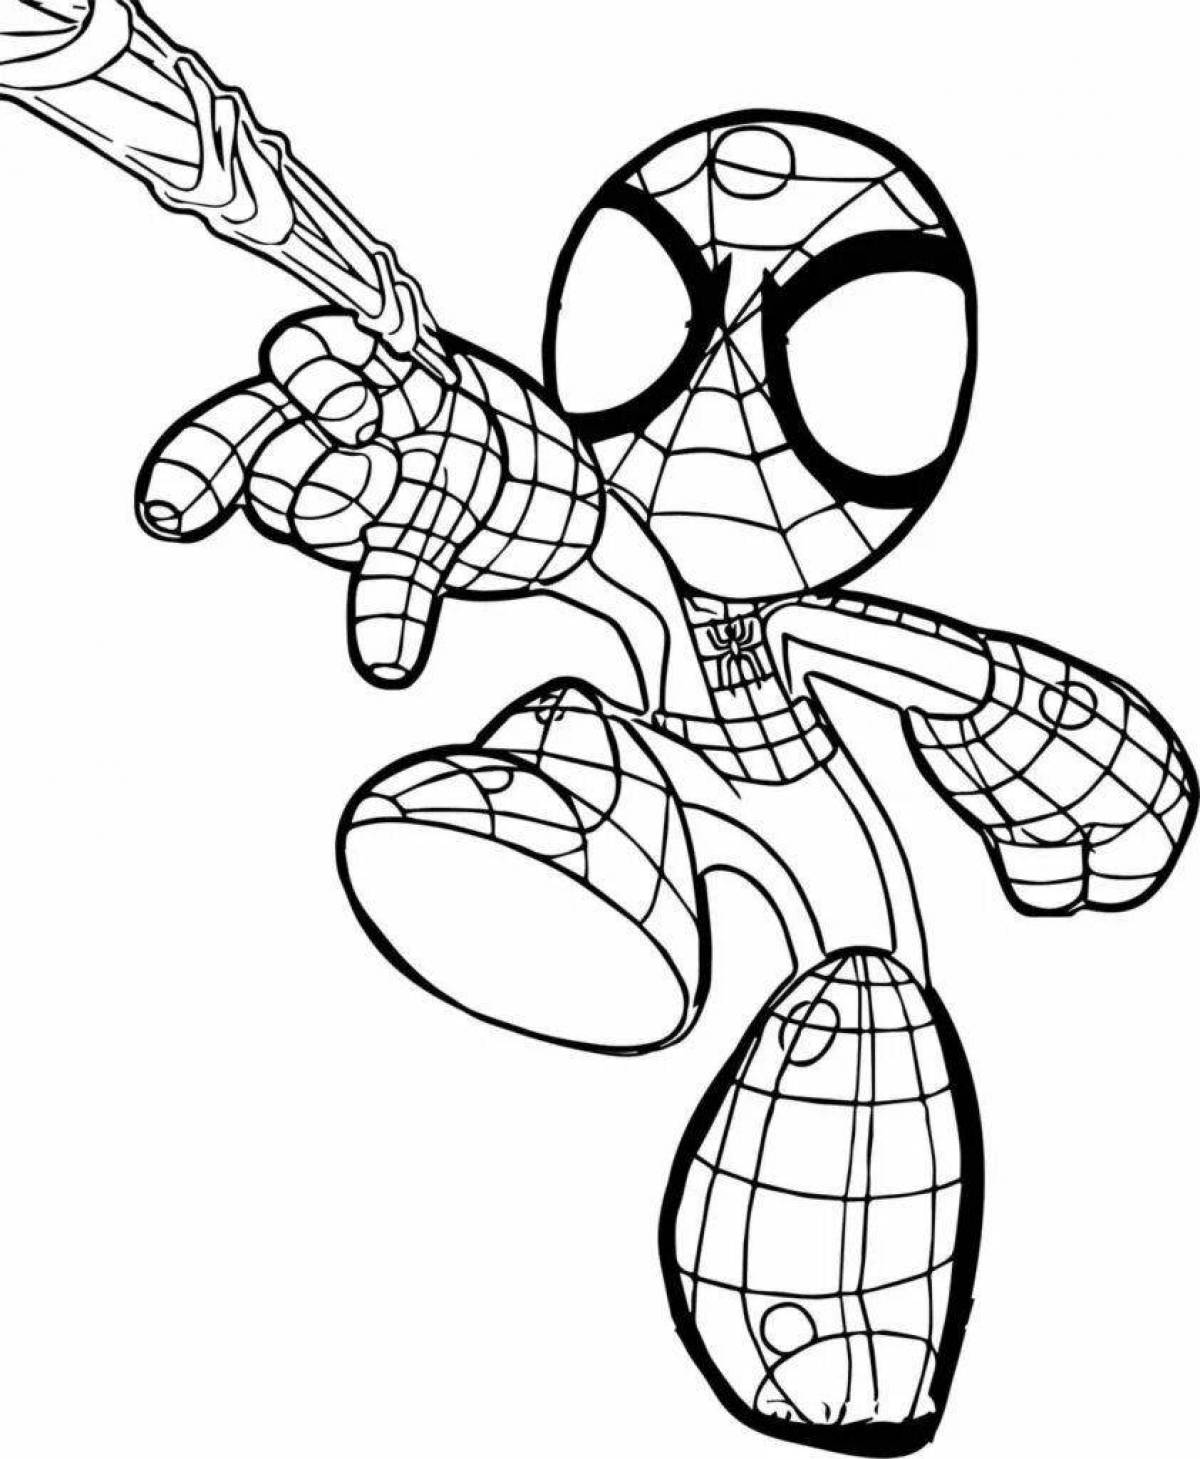 Spiderman creepy ghost coloring page